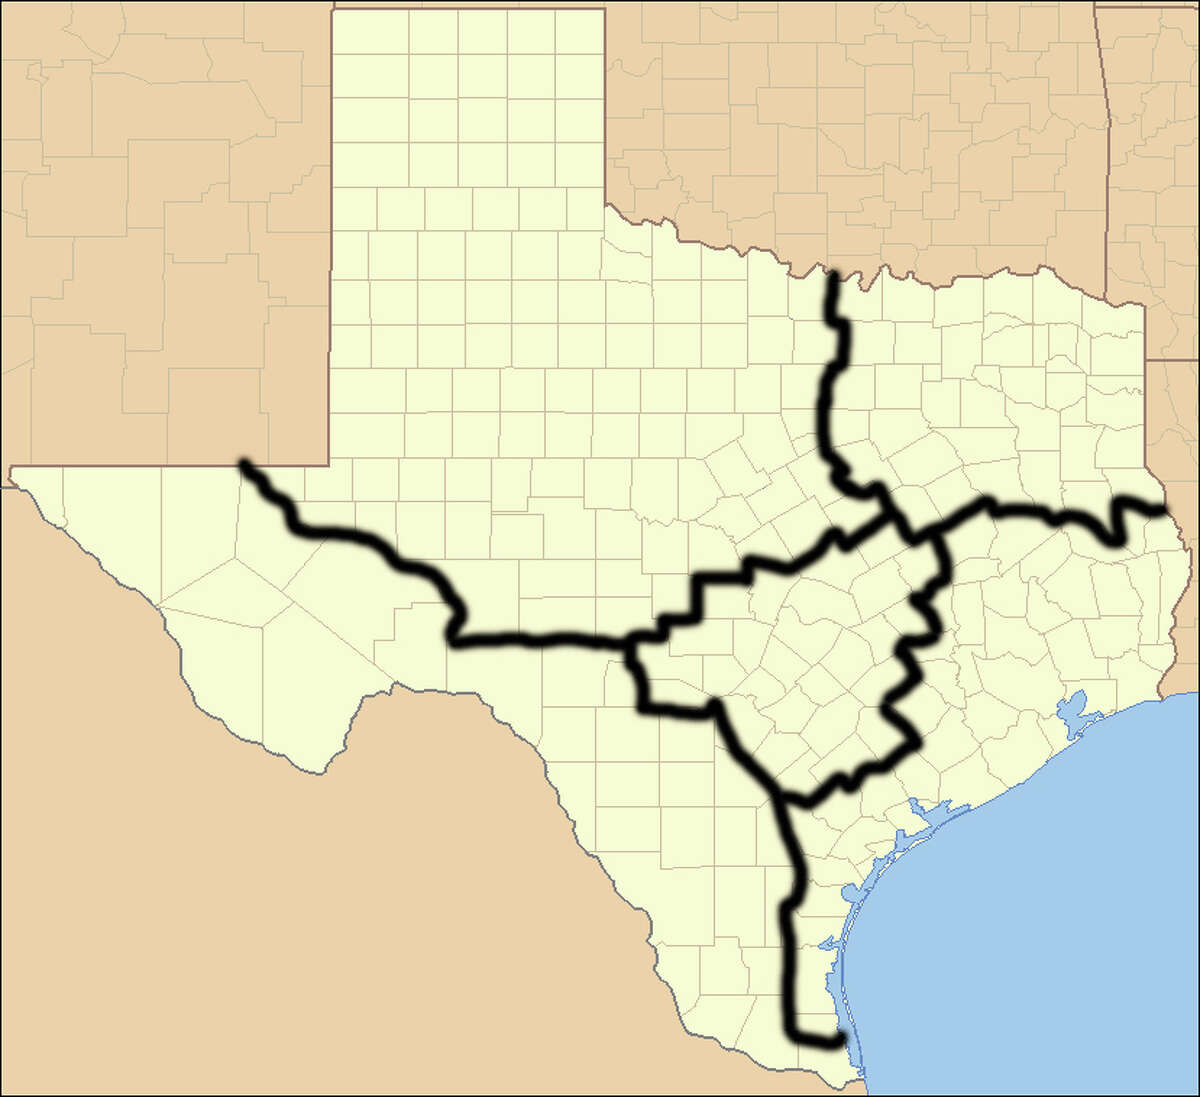 According to the 1845 Joint Resolution for Annexing Texas, we can divide ourselves into five different states if we choose. In 2009, analyst Nate Silver imagined a five-state solution based on the picture above. We decided to expand on that idea to see the different traits of each "imagined" state.Photo: Ruhrfisch / Wikimedia Commons